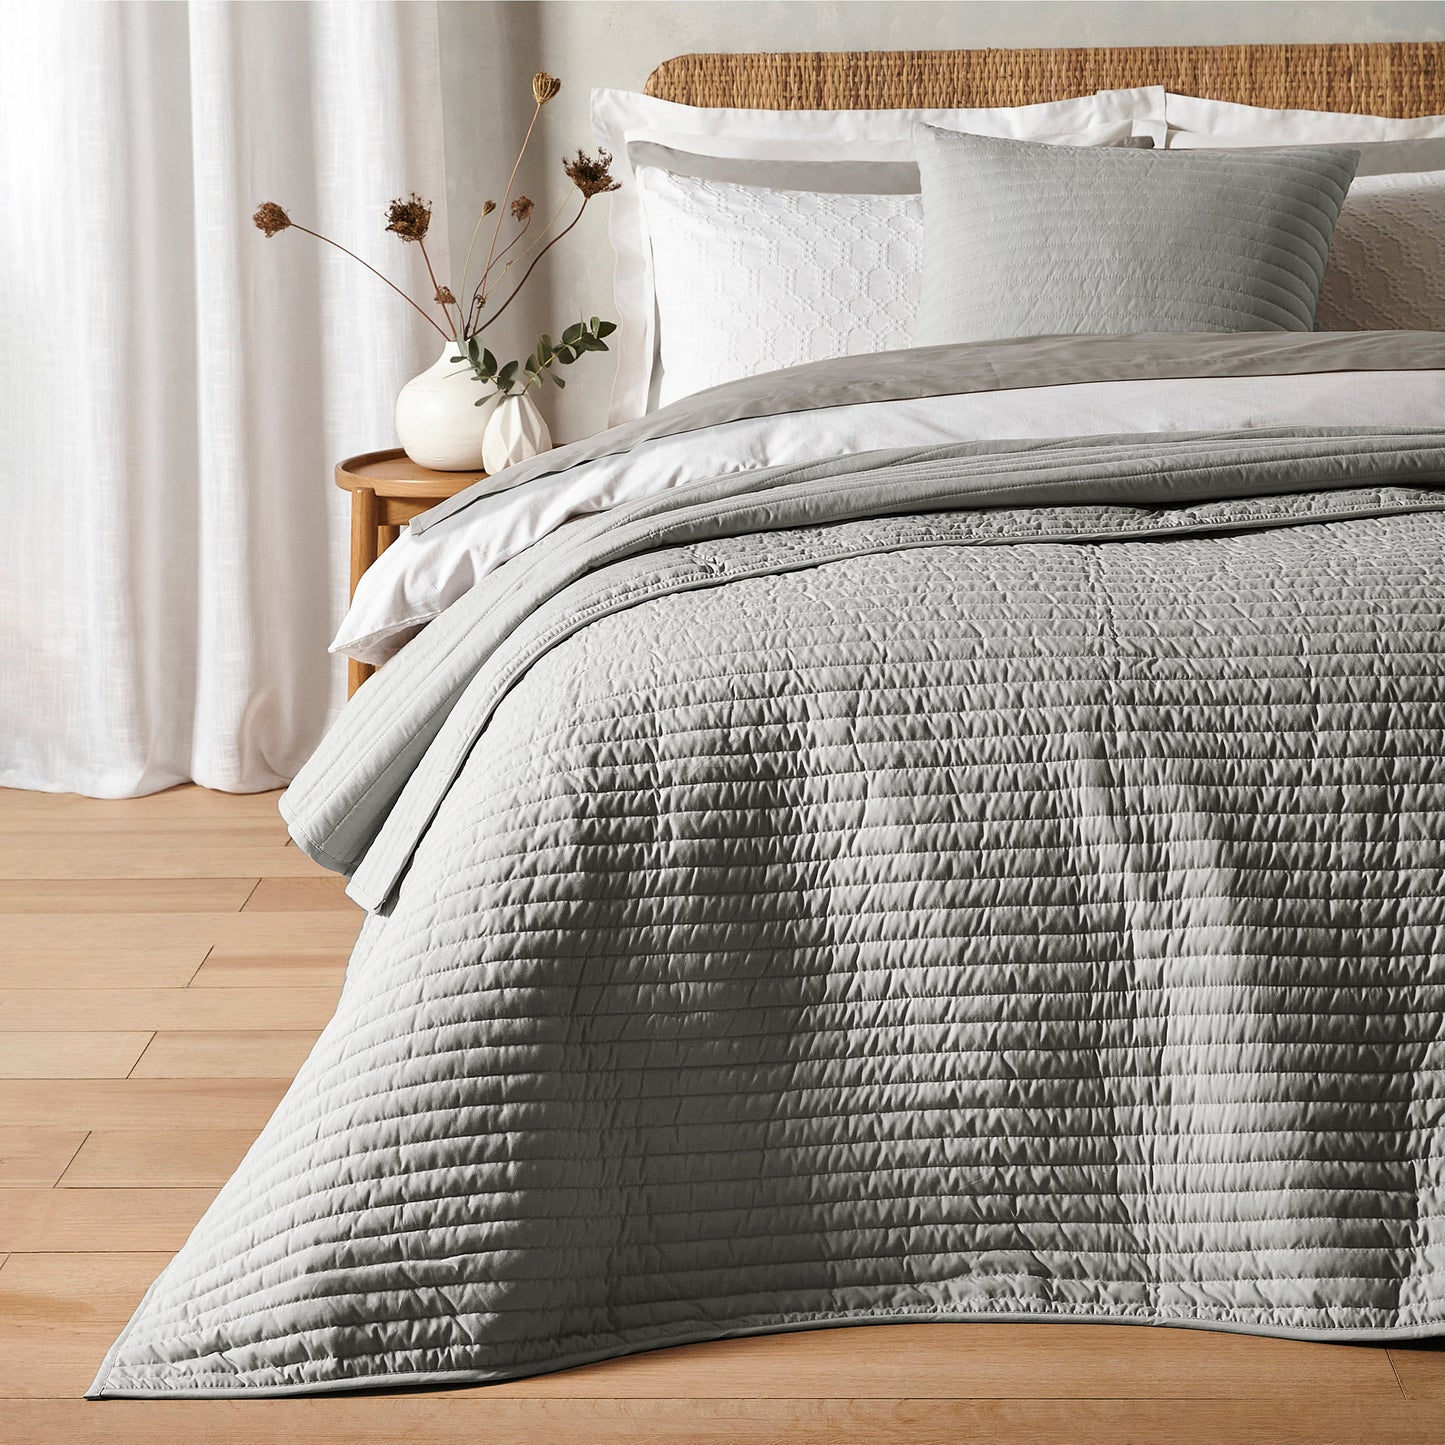 Bianca Silver Quilted Lines Bedspread (220cm x 230cm)